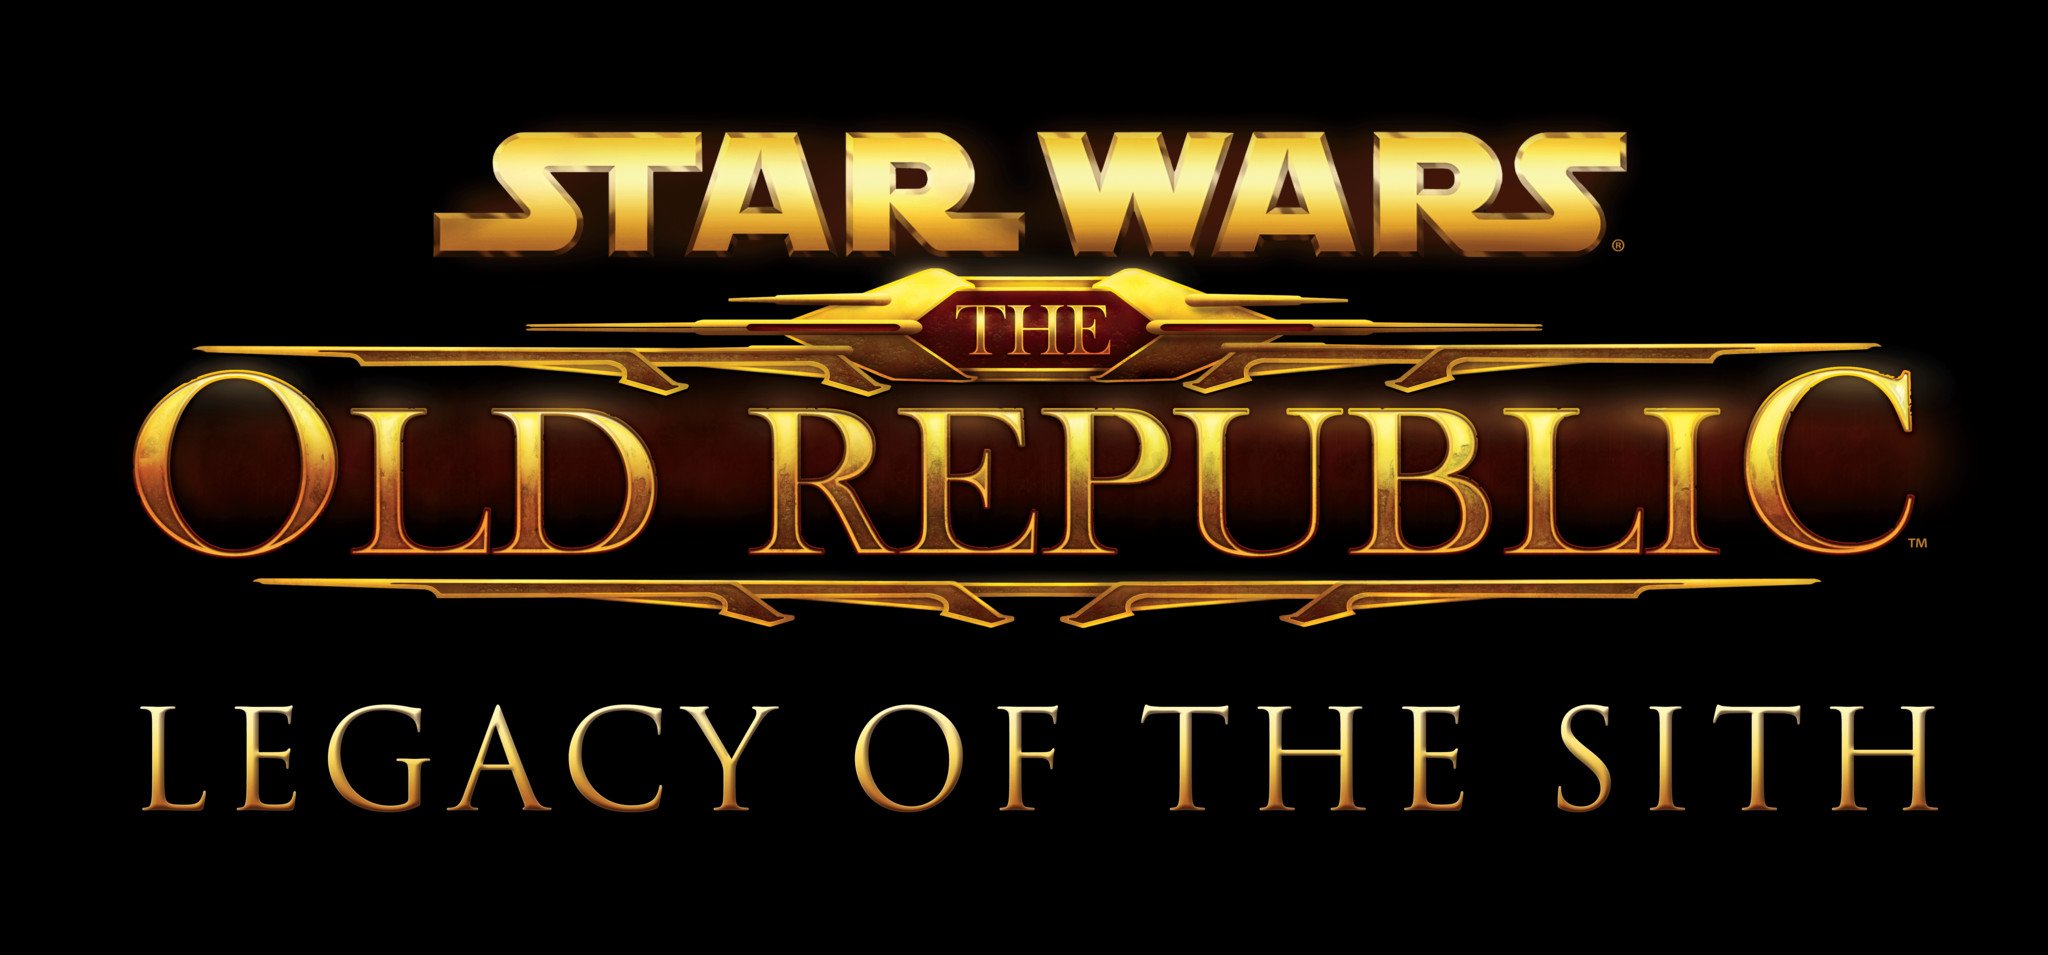 Star Wars The Old Republic Legacy Of The Sith Key Art